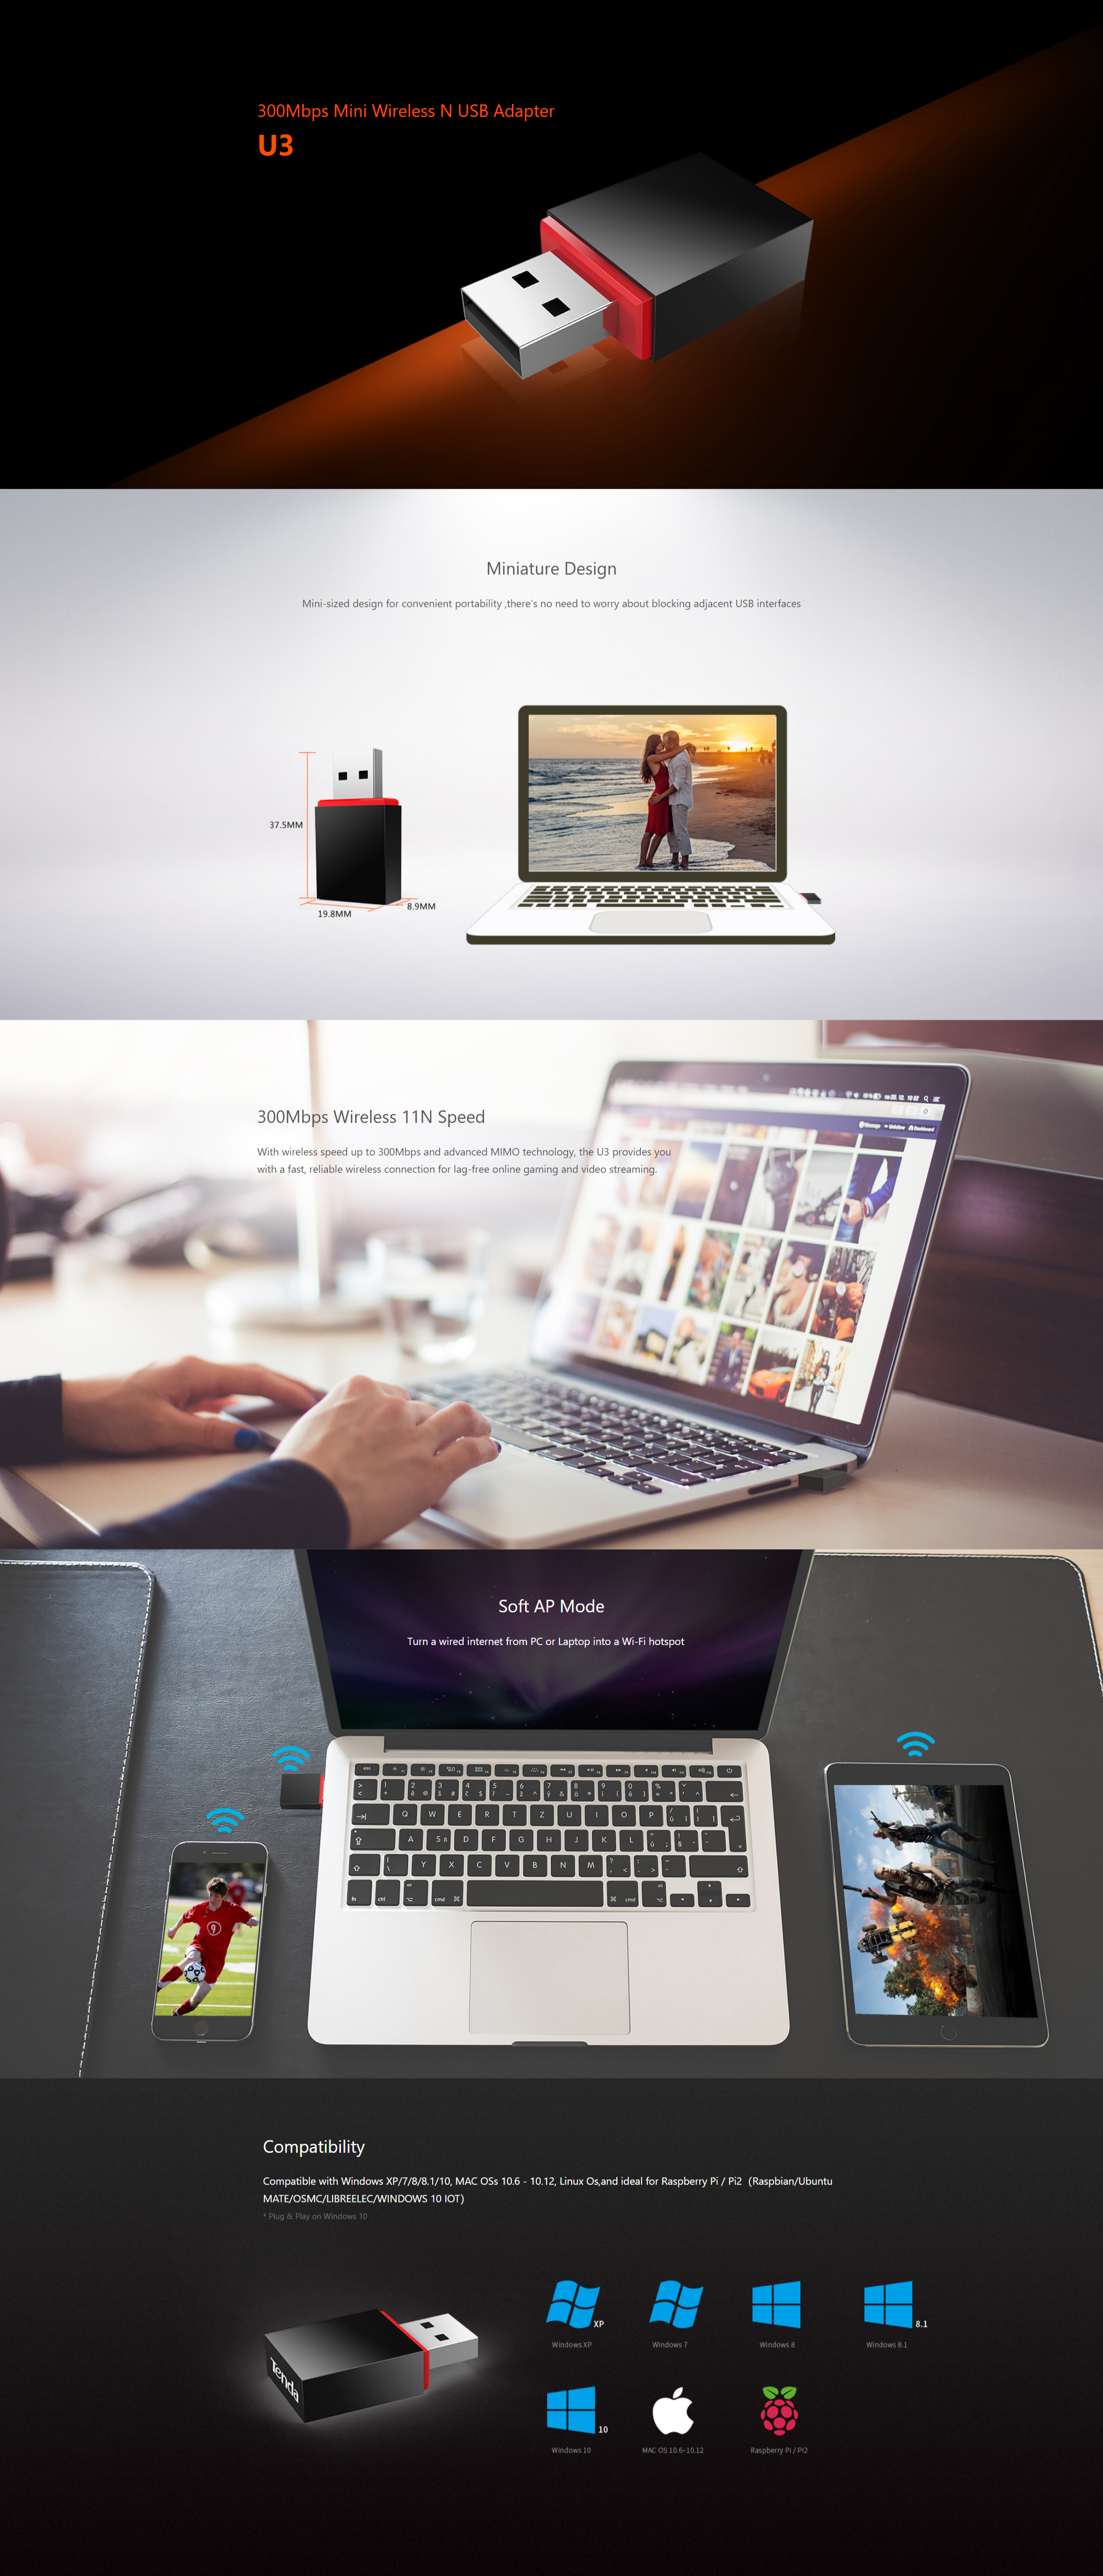 A large marketing image providing additional information about the product Tenda U3 N300 Wi-Fi Mini USB Adapter - Additional alt info not provided